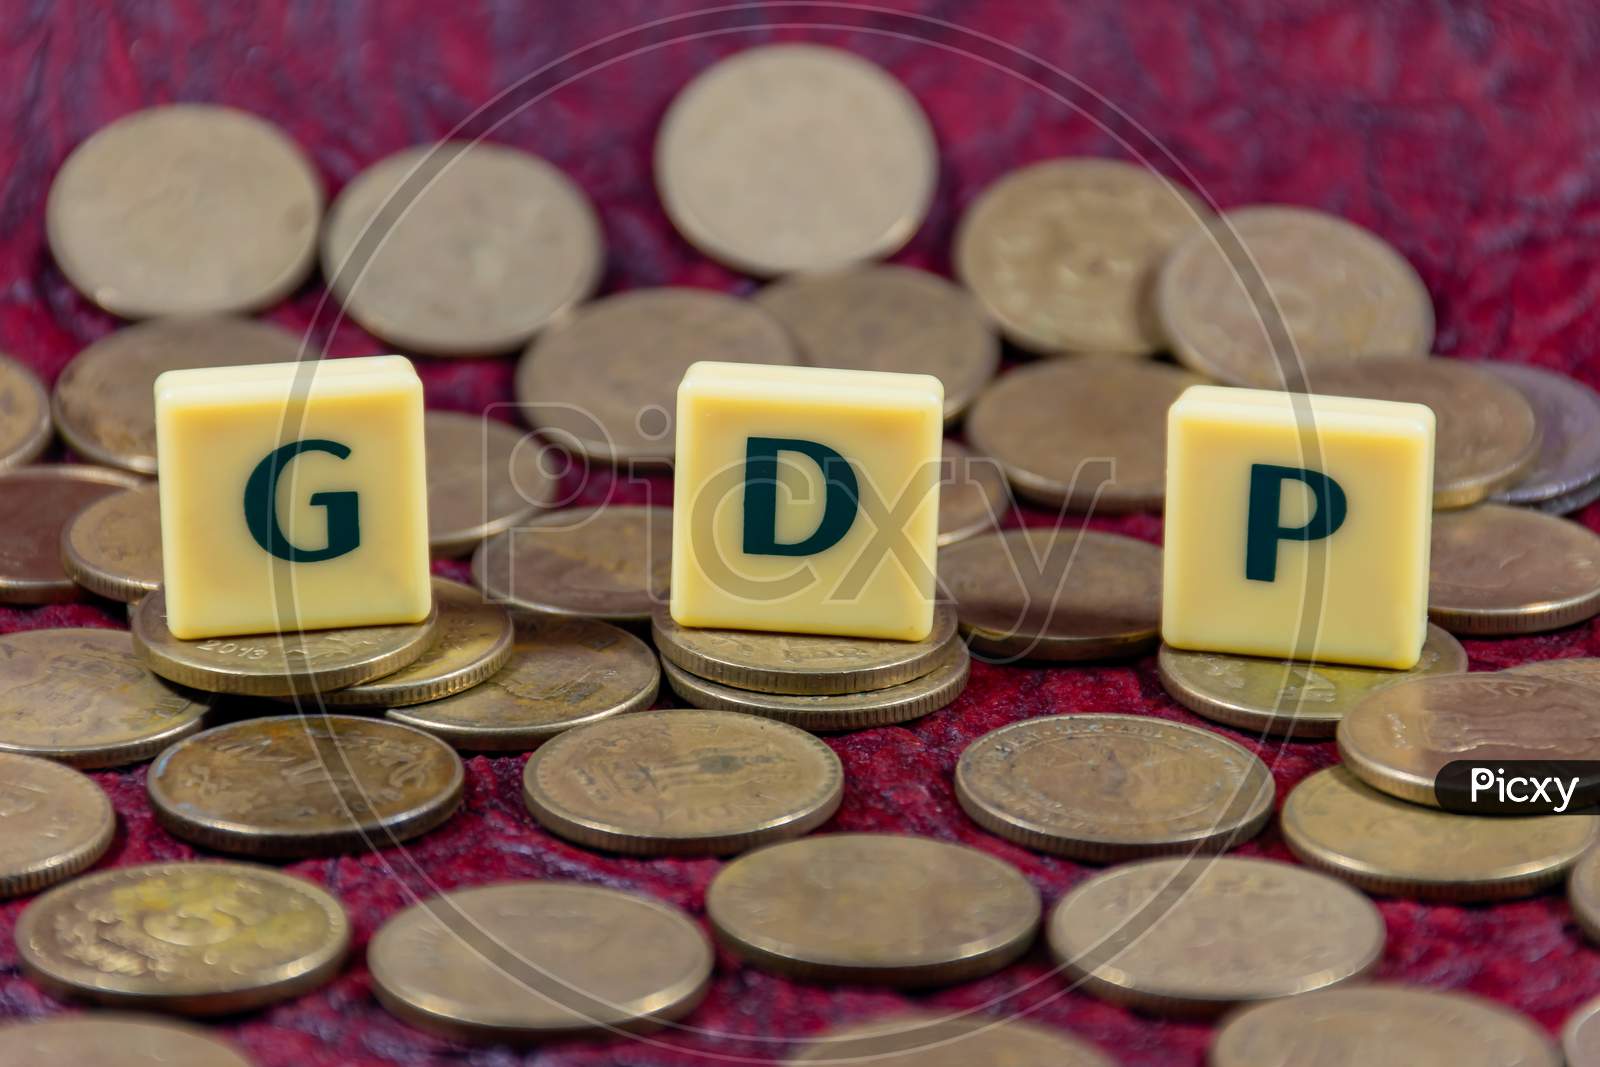 Gross domestic product or GDP word design with Indian five rupee coin for various type of financial transaction or stock market option